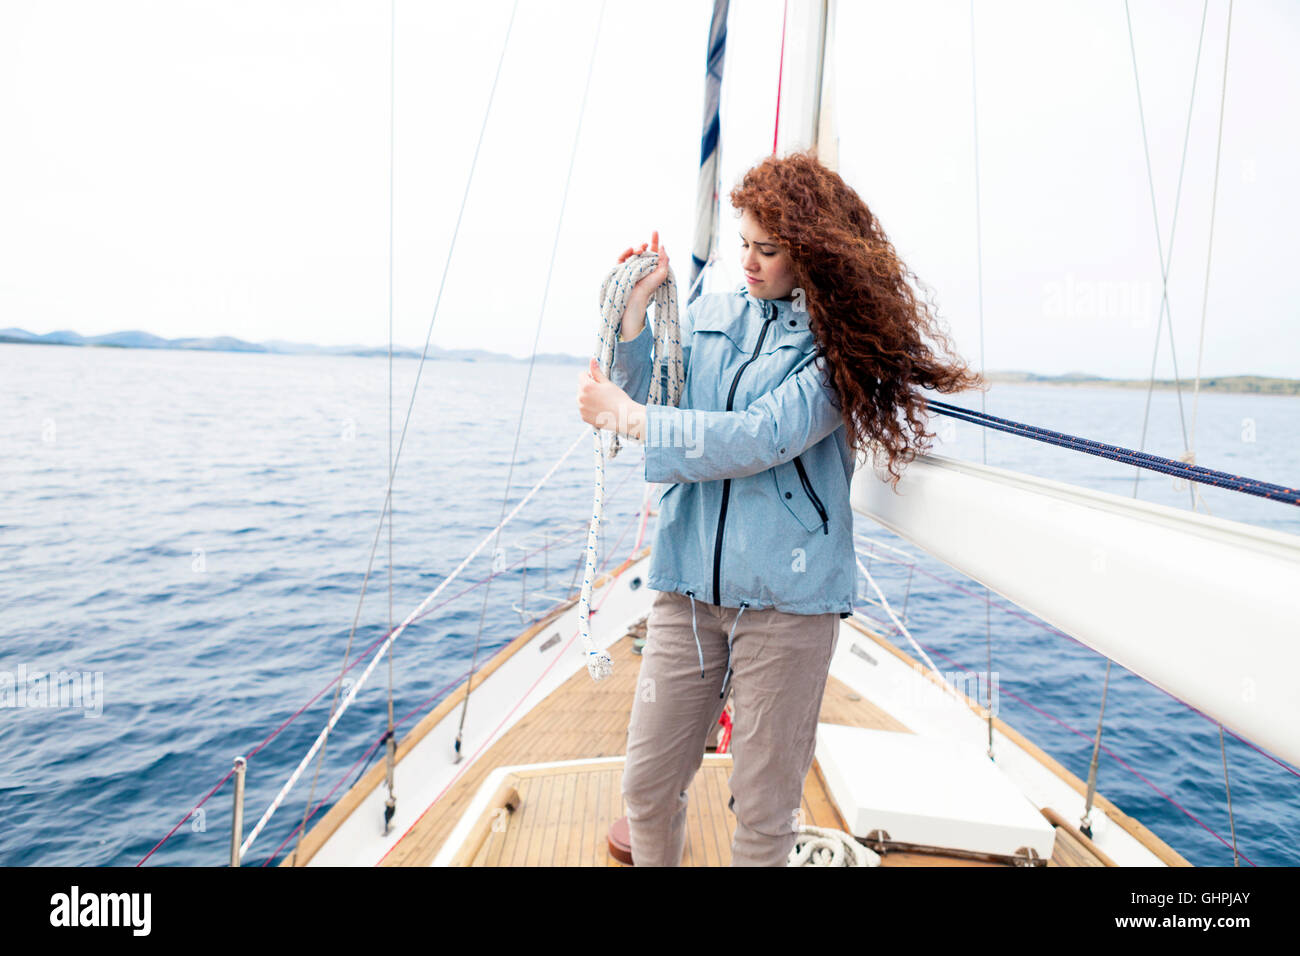 Young woman on yacht curling up rope Stock Photo